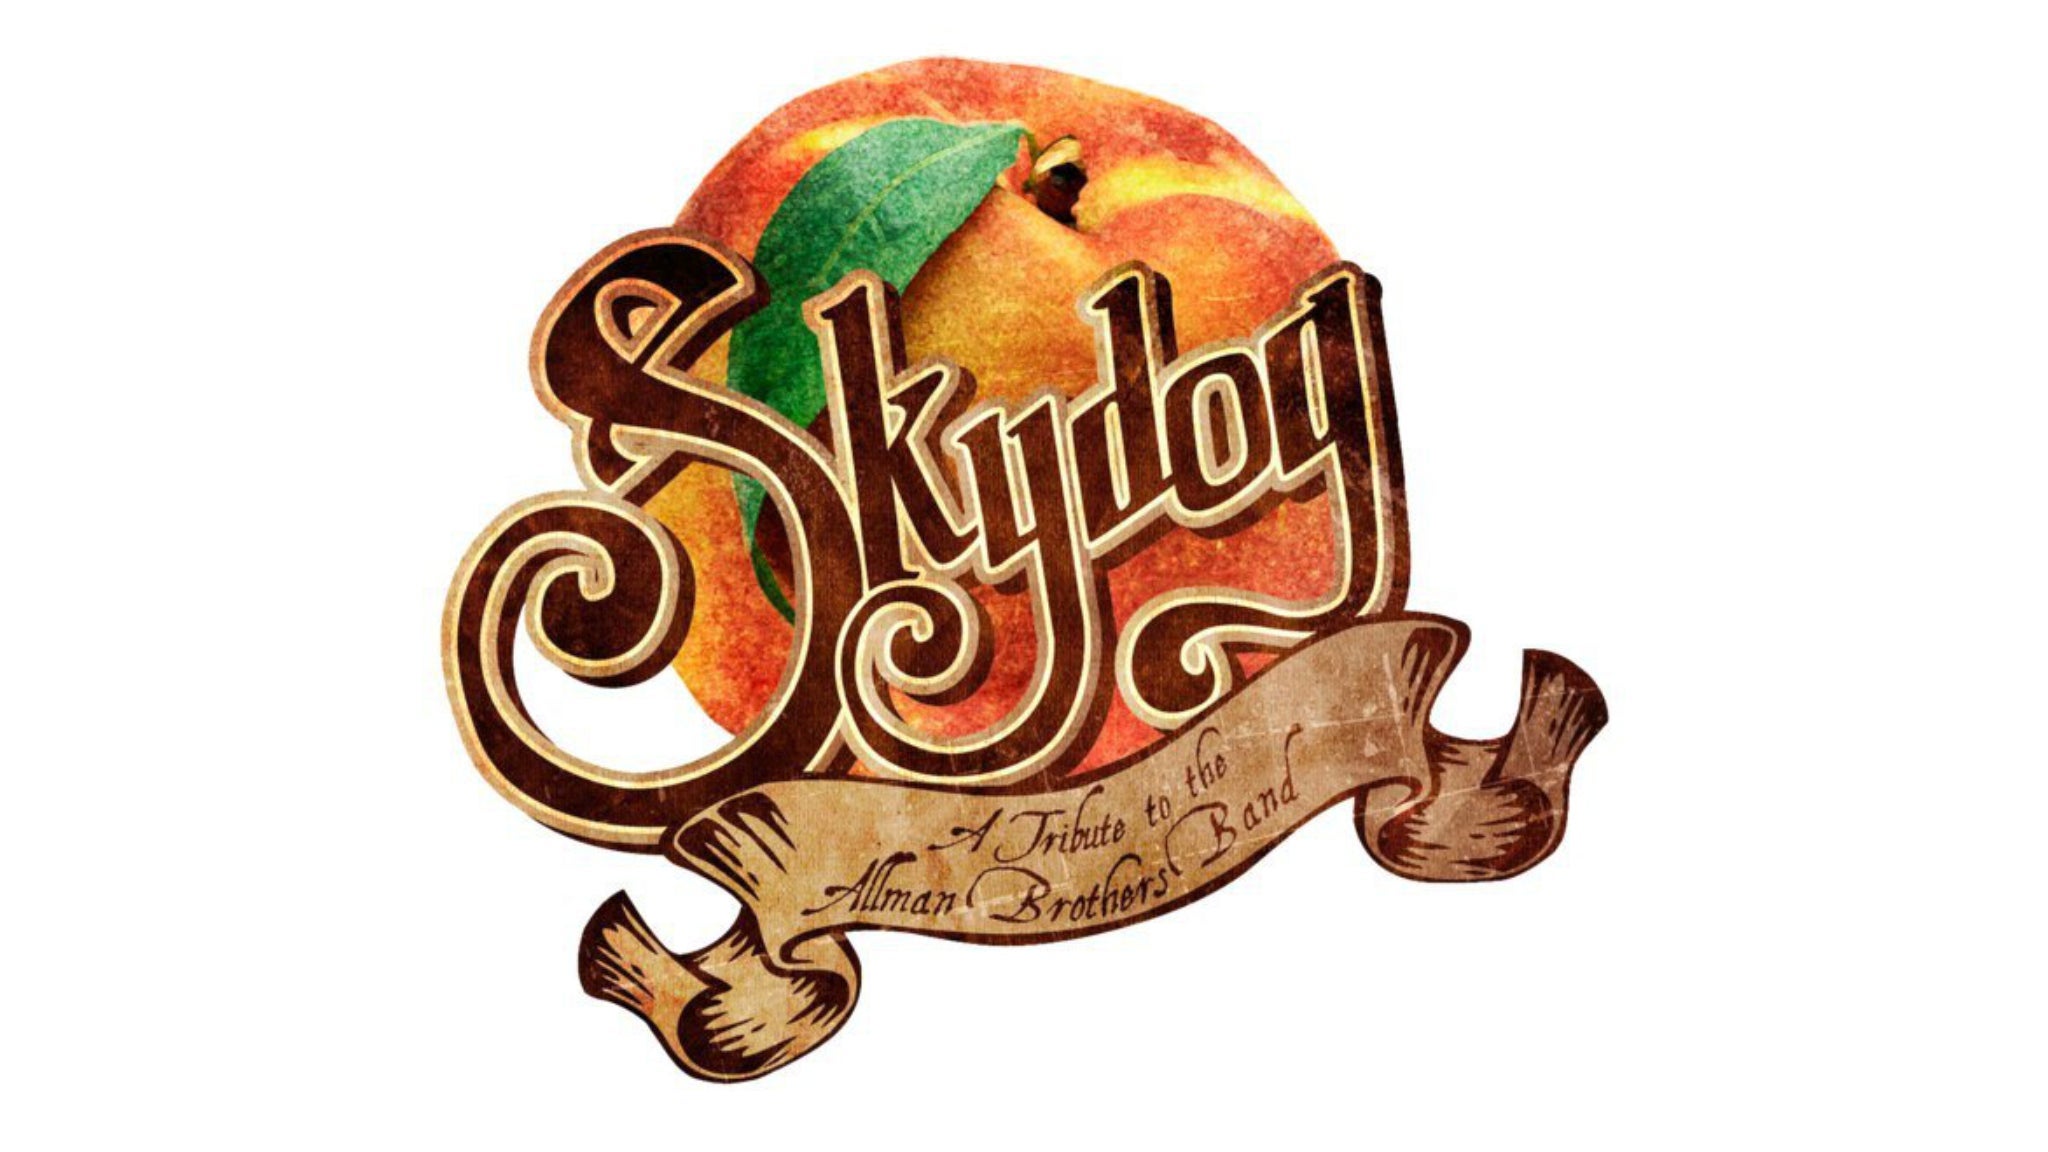 Skydog - A Tribute to the Allman Brothers Band in Virginia Beach promo photo for Box Office Day Of Show presale offer code